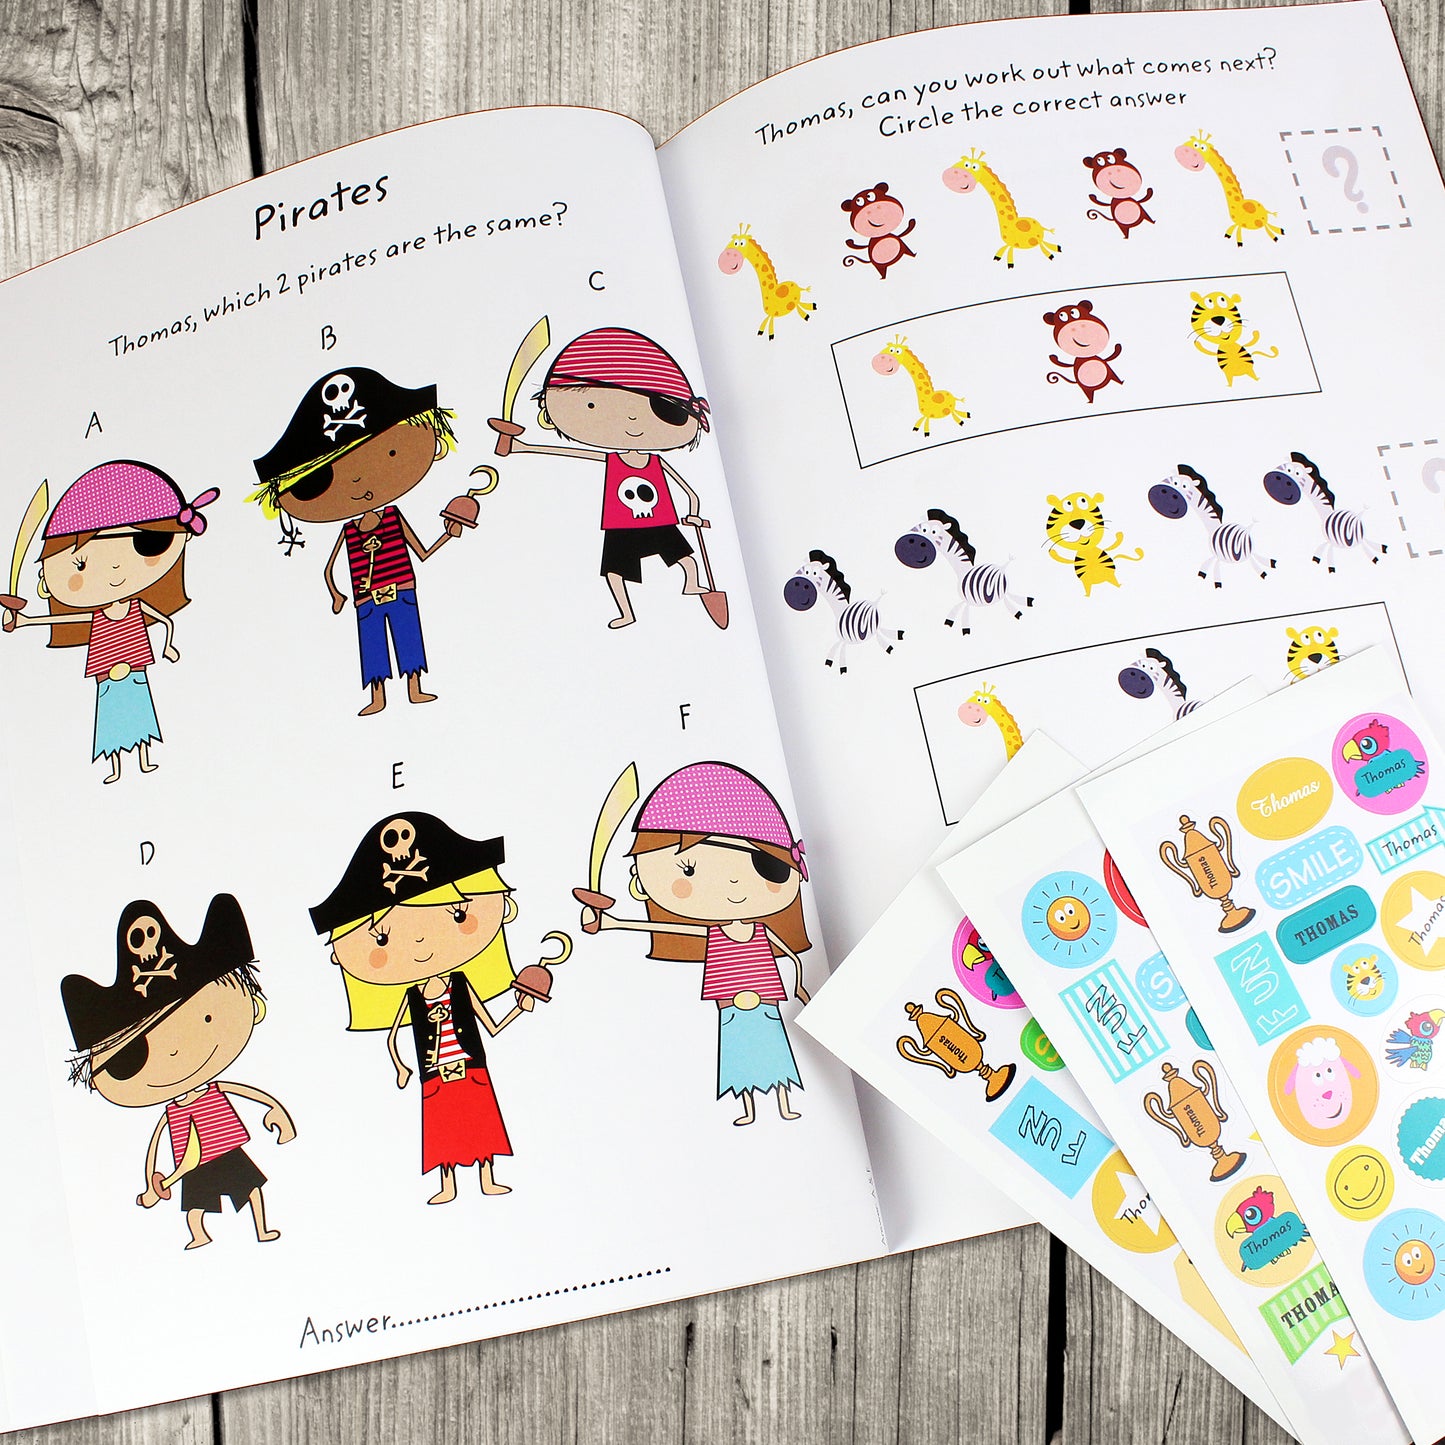 Personalised Activity Book with Stickers - Personalise It!